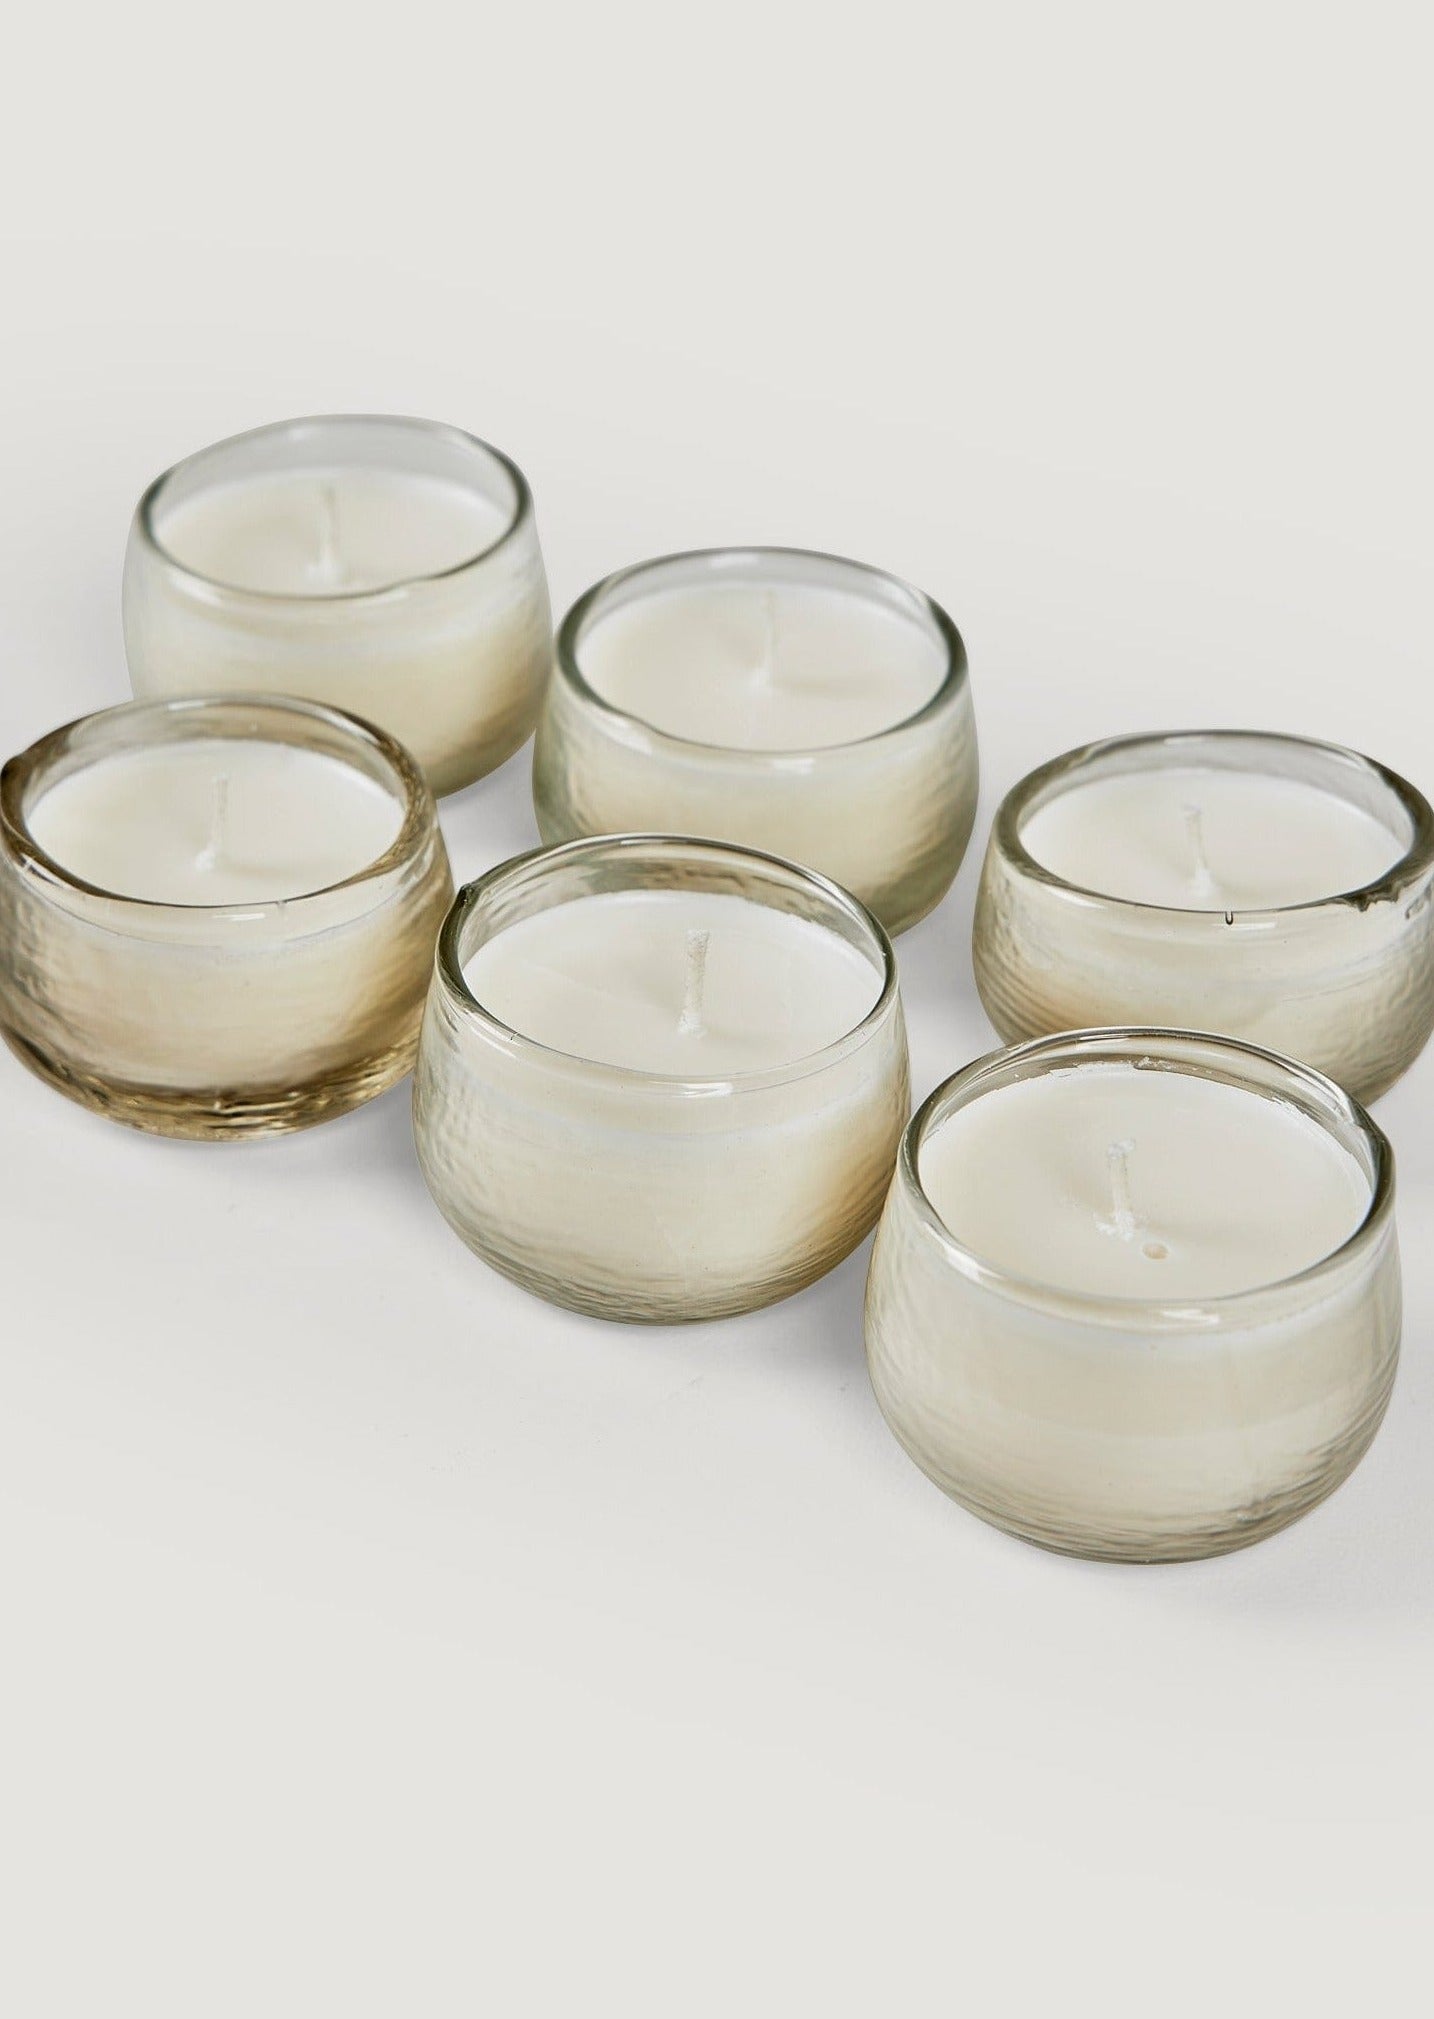 Illuminate Your Home with Clear Glass Hanging Votive Cups - Set of 6